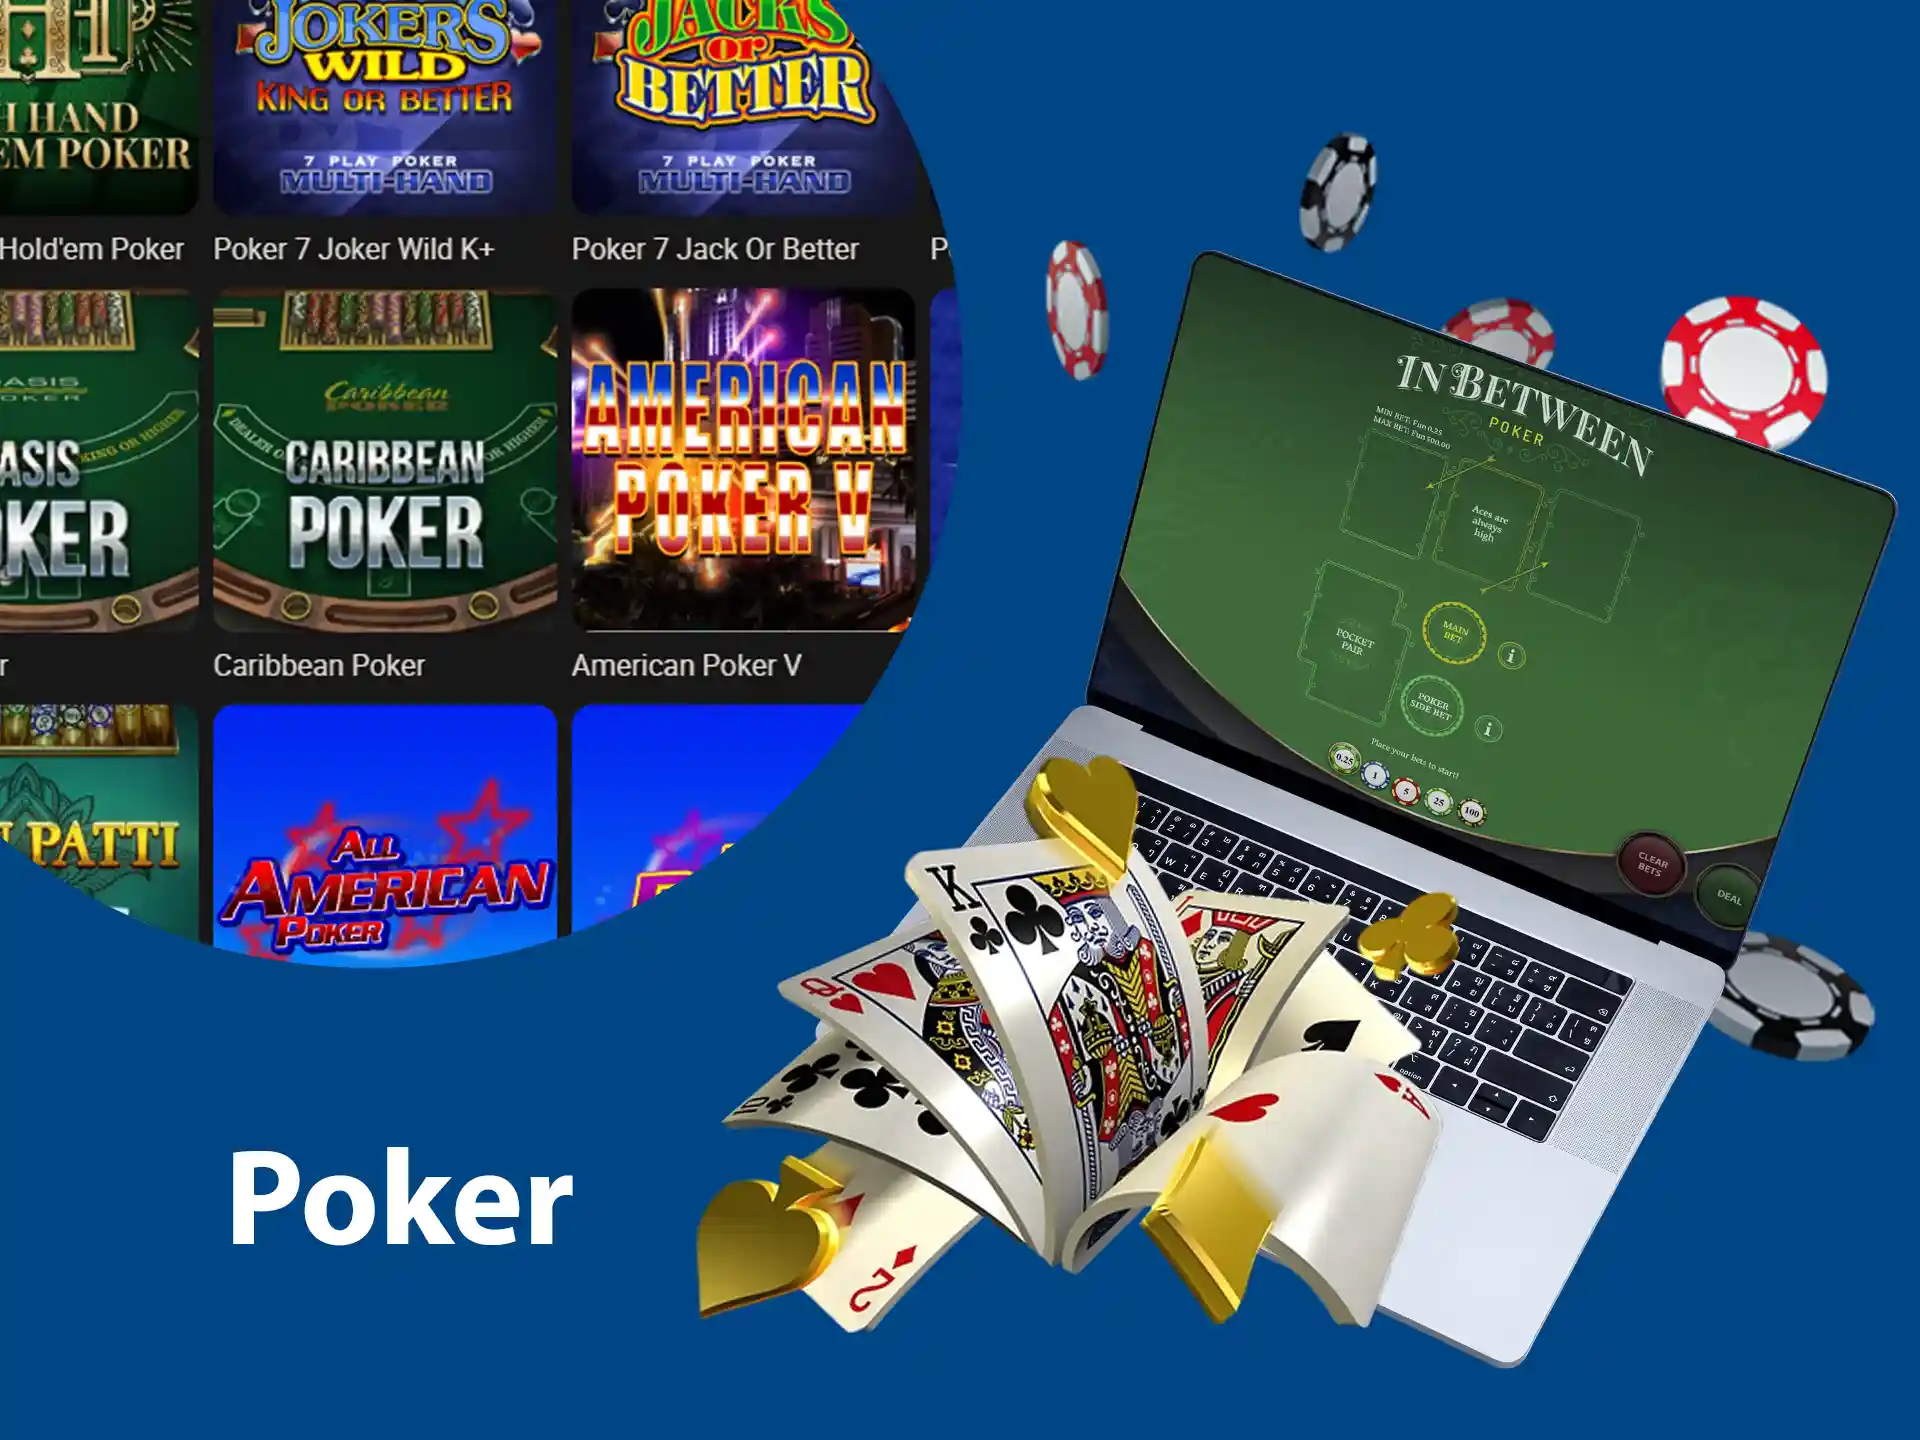 Win chips or money in the Poker card game.